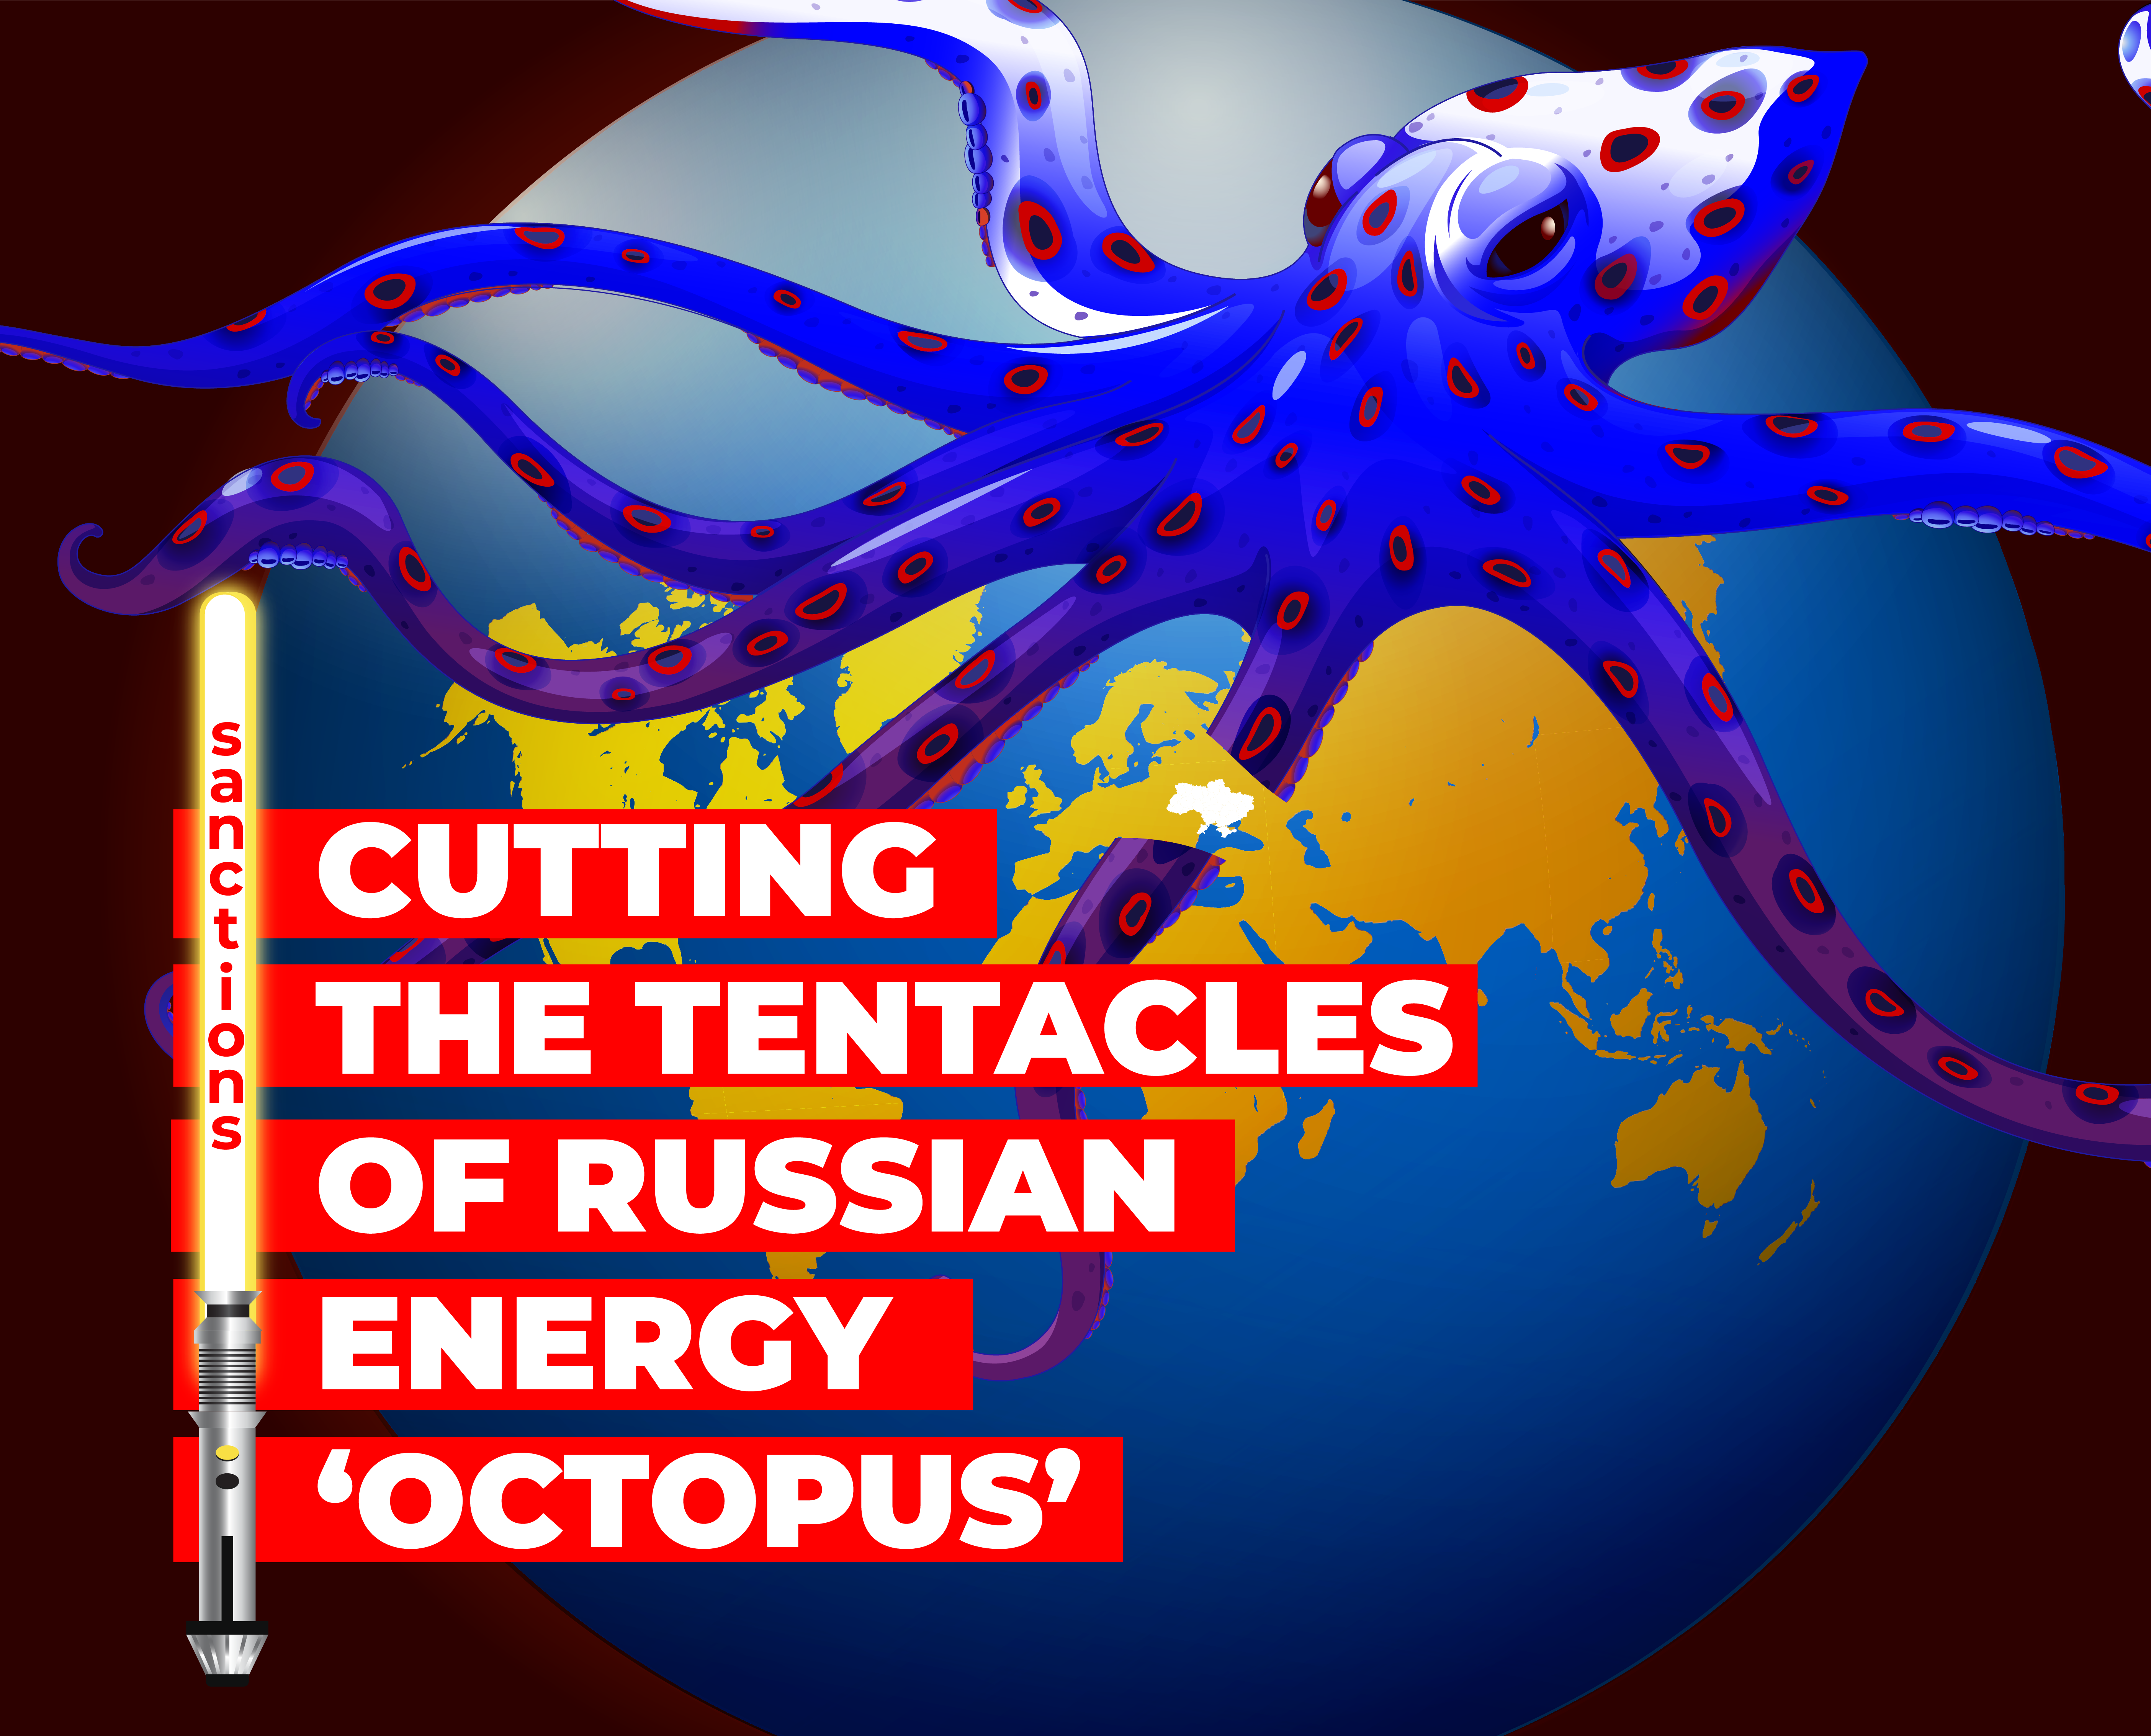 Rosatom: how to cut off the tentacles of the Russian energy octopus